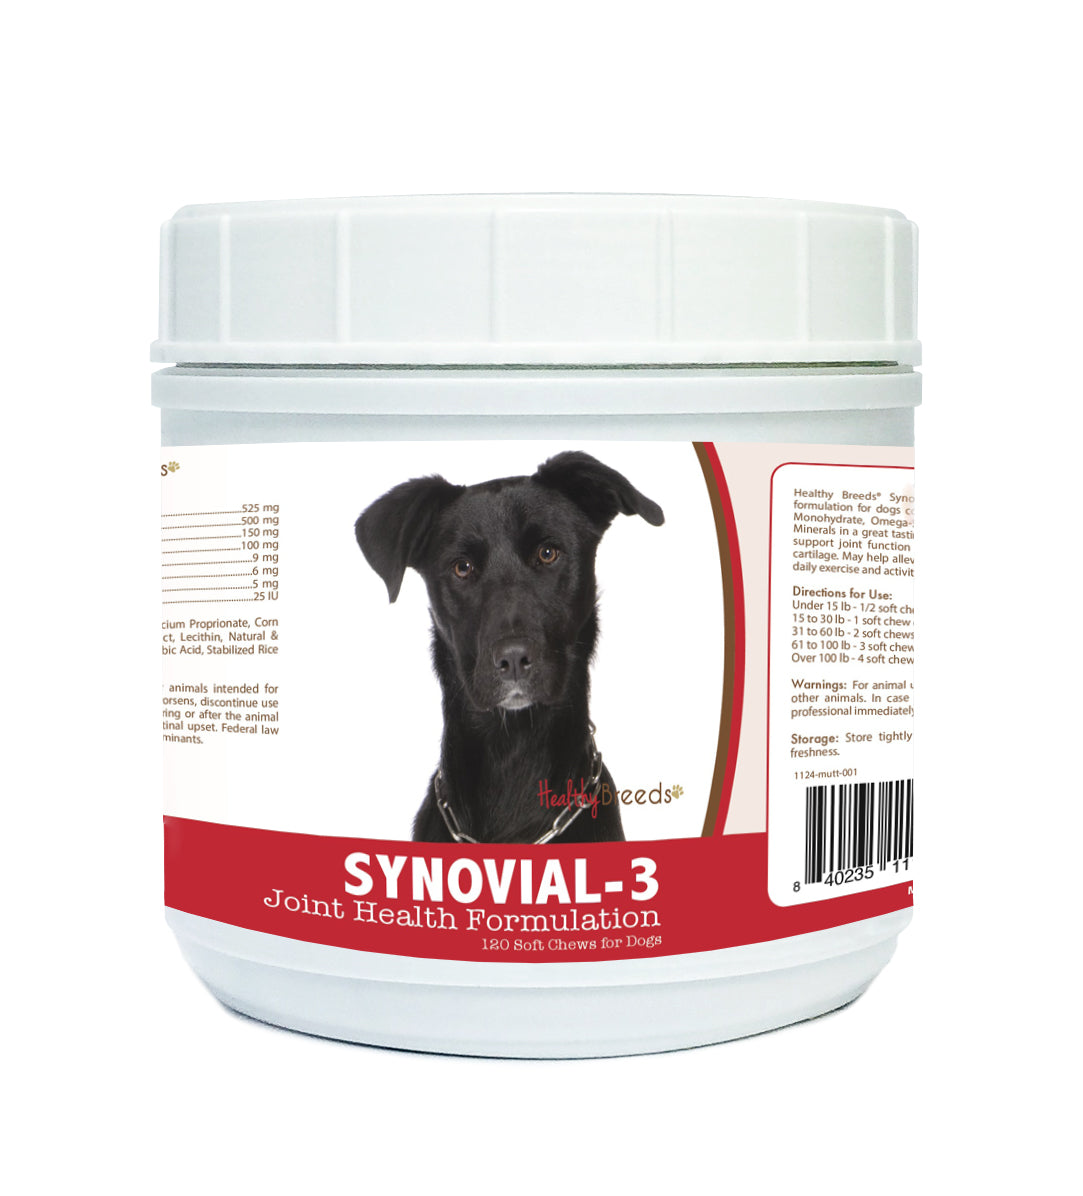 Mutt Synovial-3 Joint Health Formulation Soft Chews 120 Count